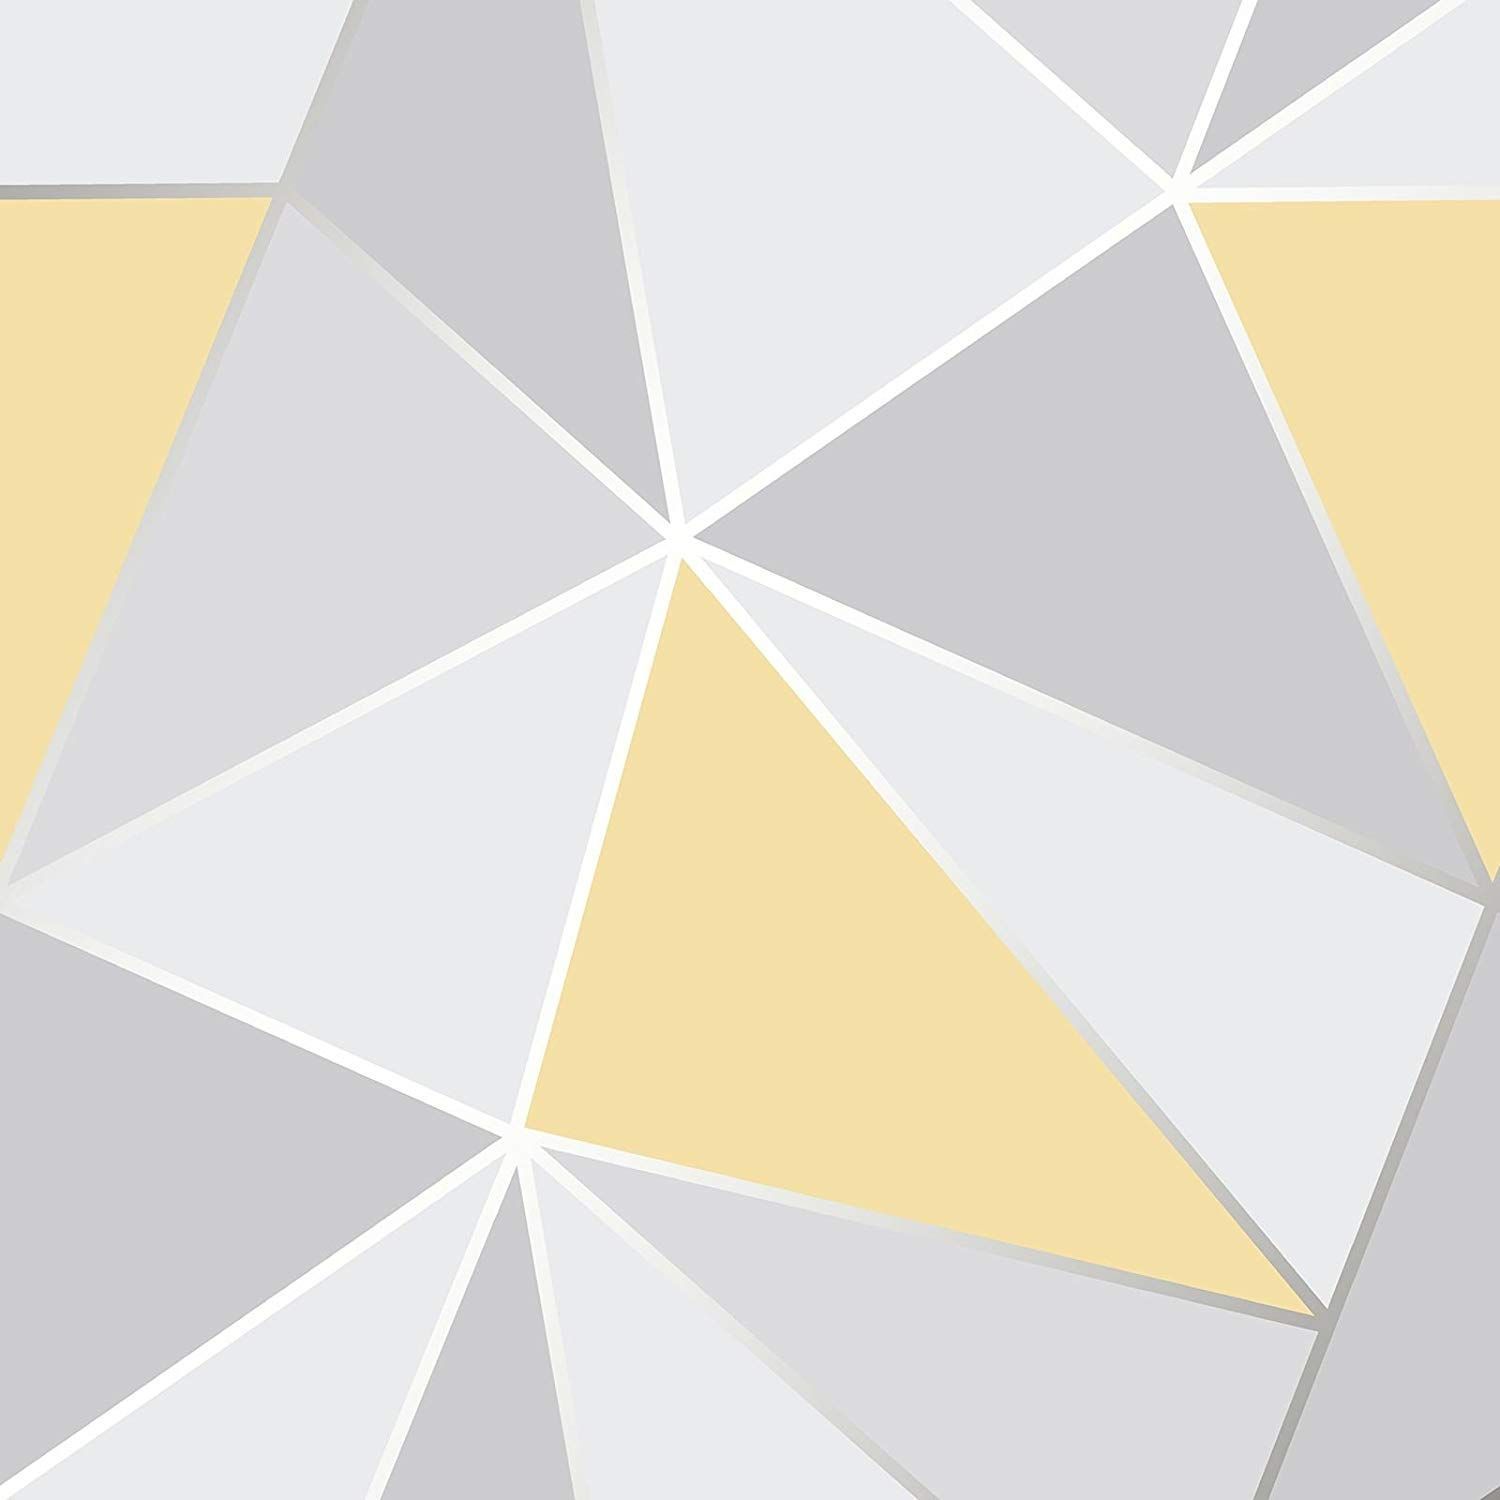 A pattern of triangles in gray and yellow - Geometry